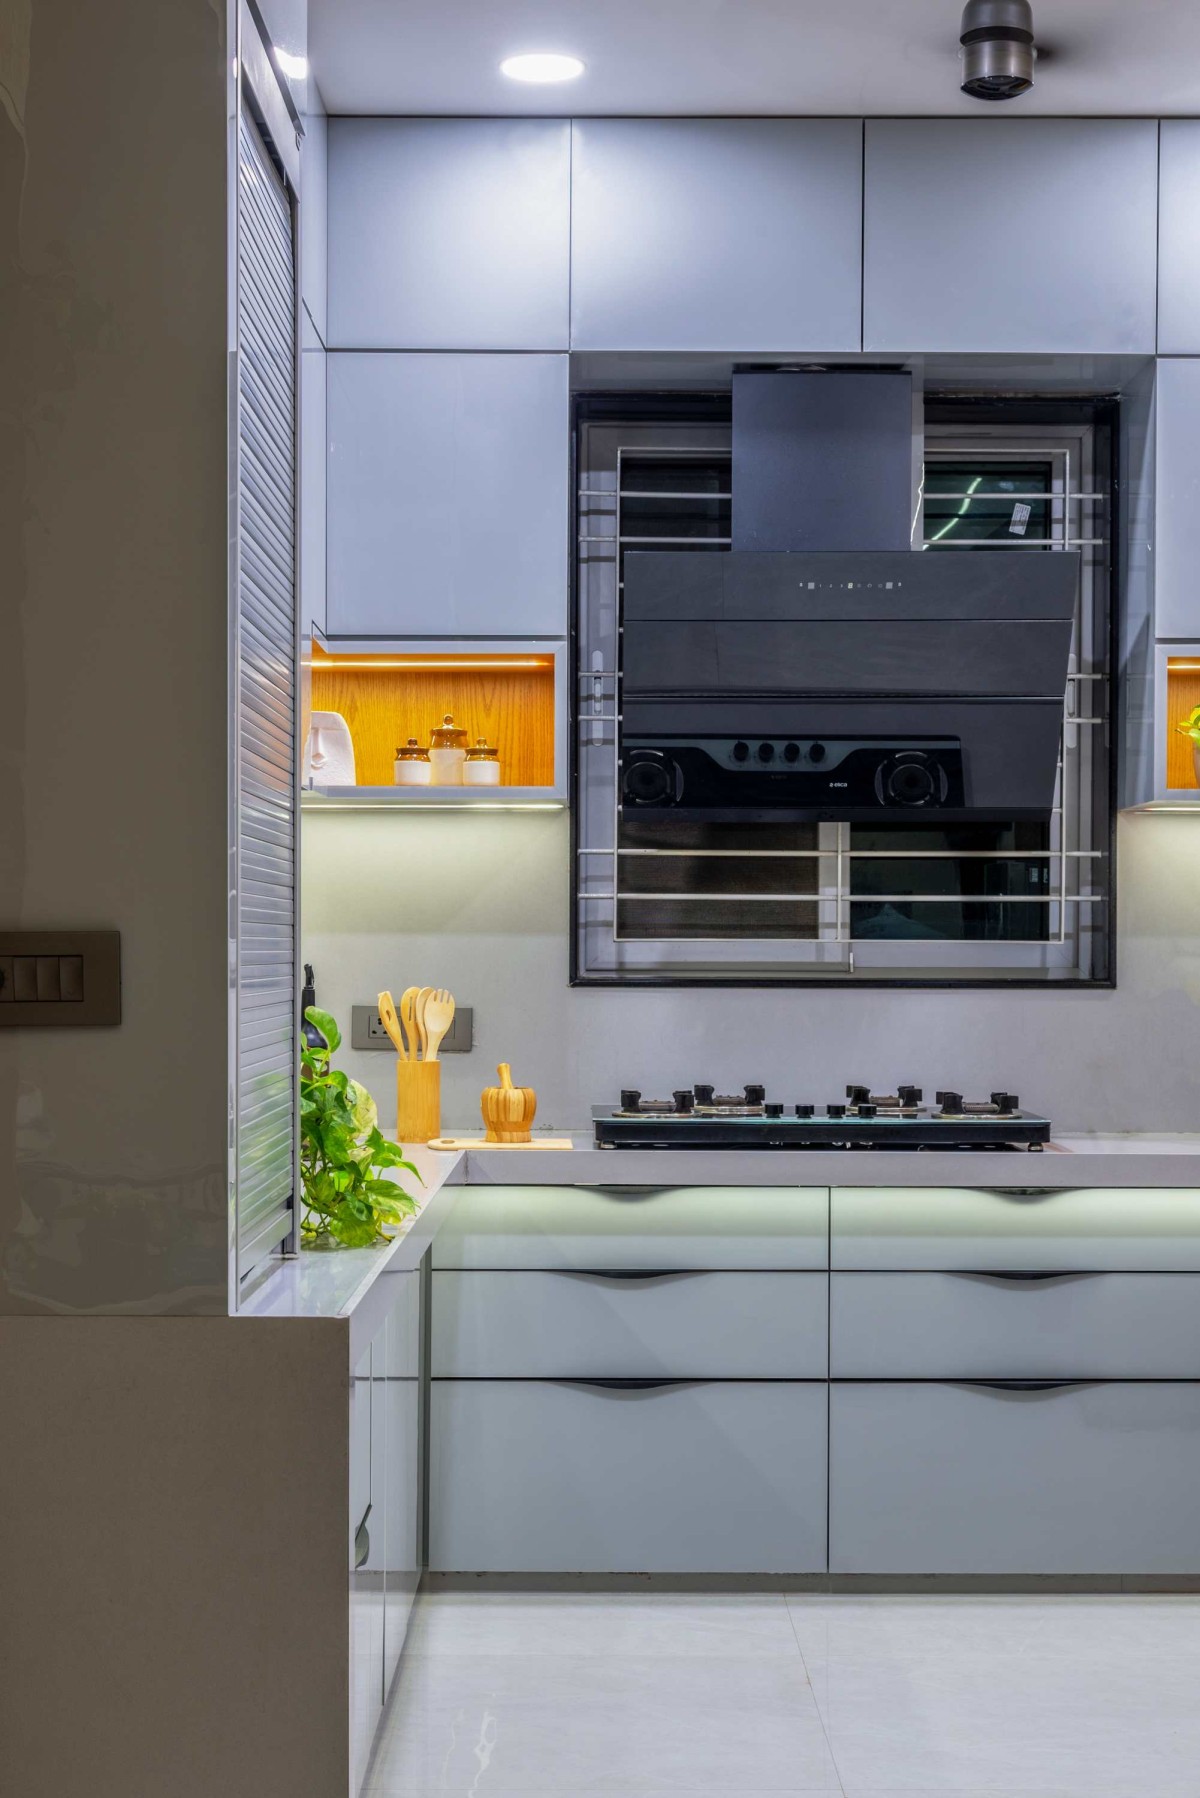 Kitchen of Parekh's Residence by J Architects